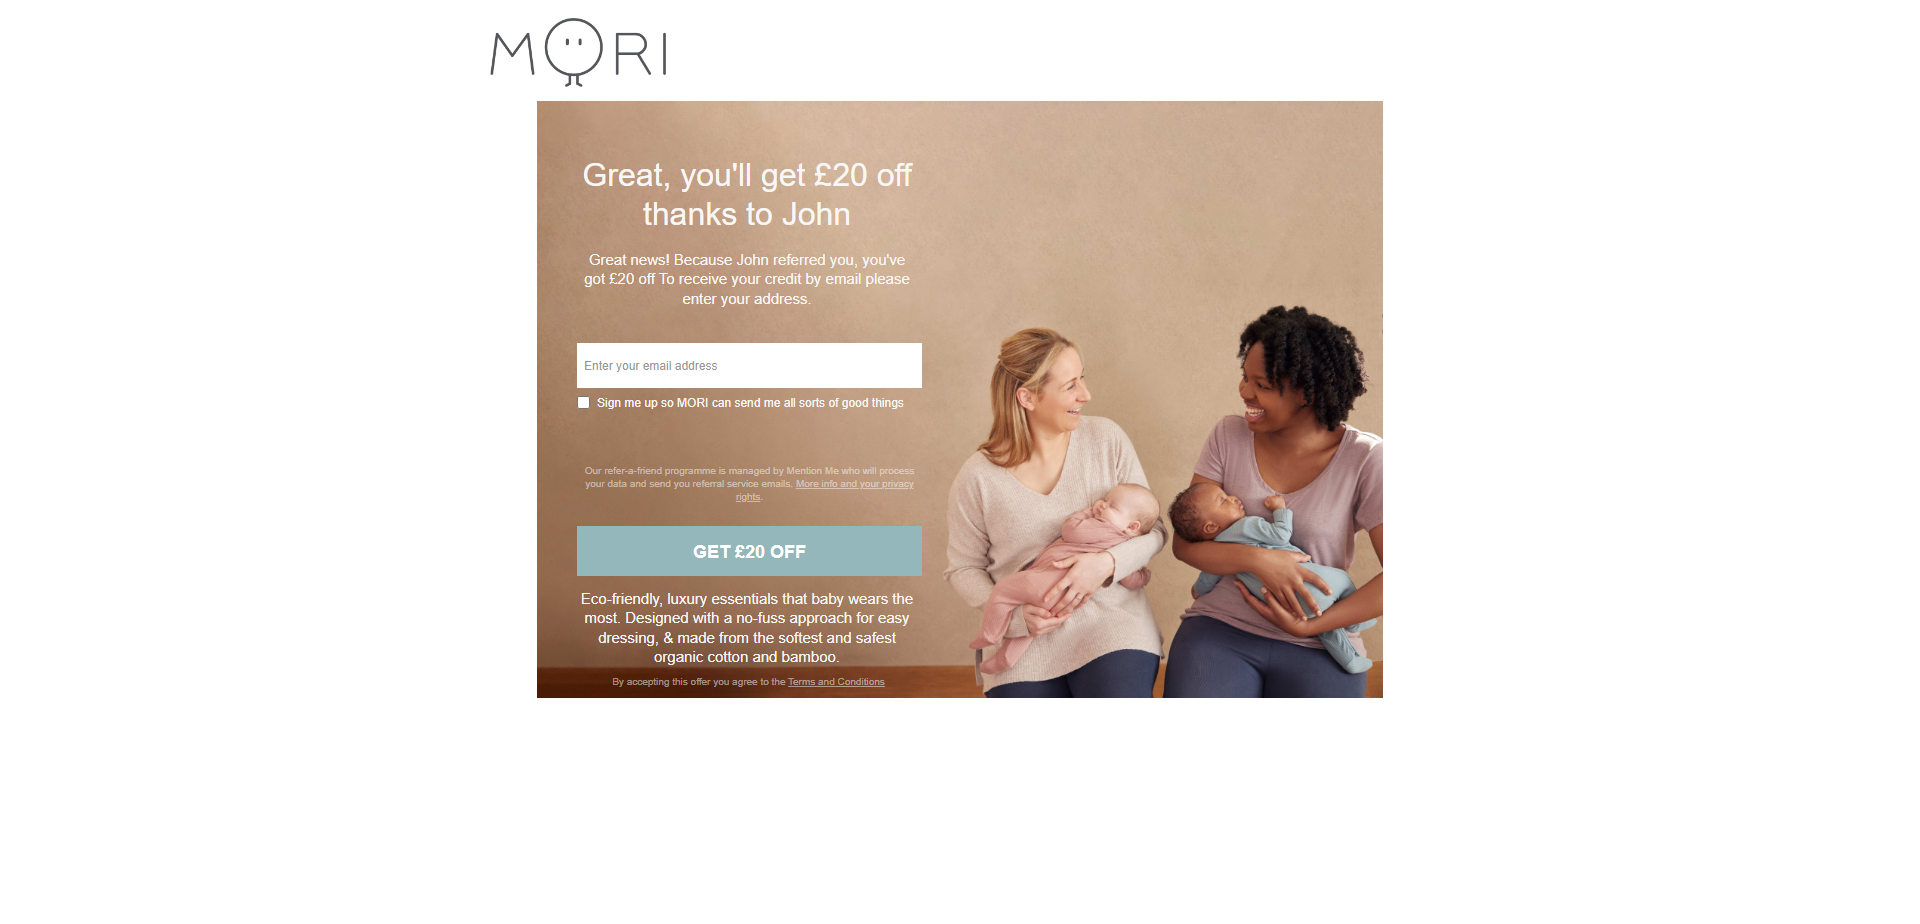 Referral Landing Page for Mori